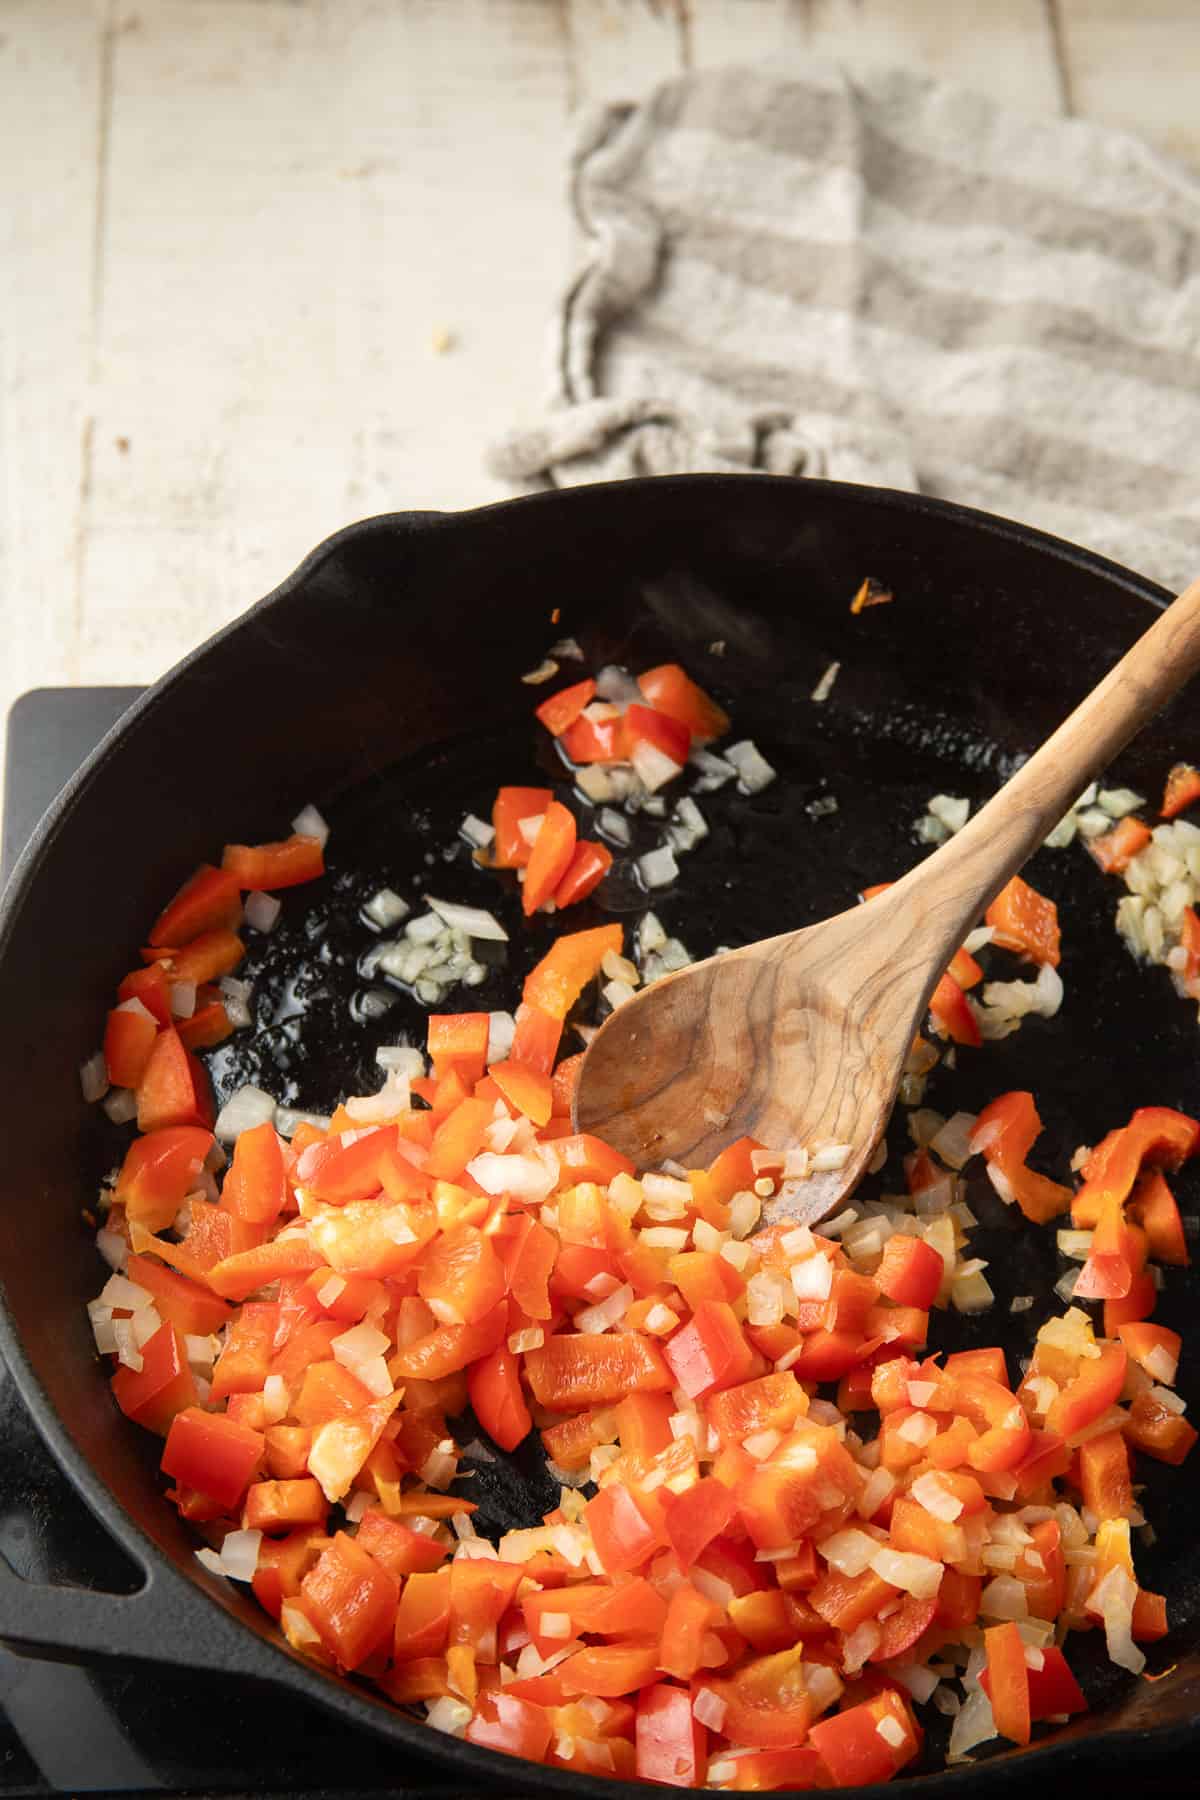 Red bell pepper and onion cooking in oil in a skillet.